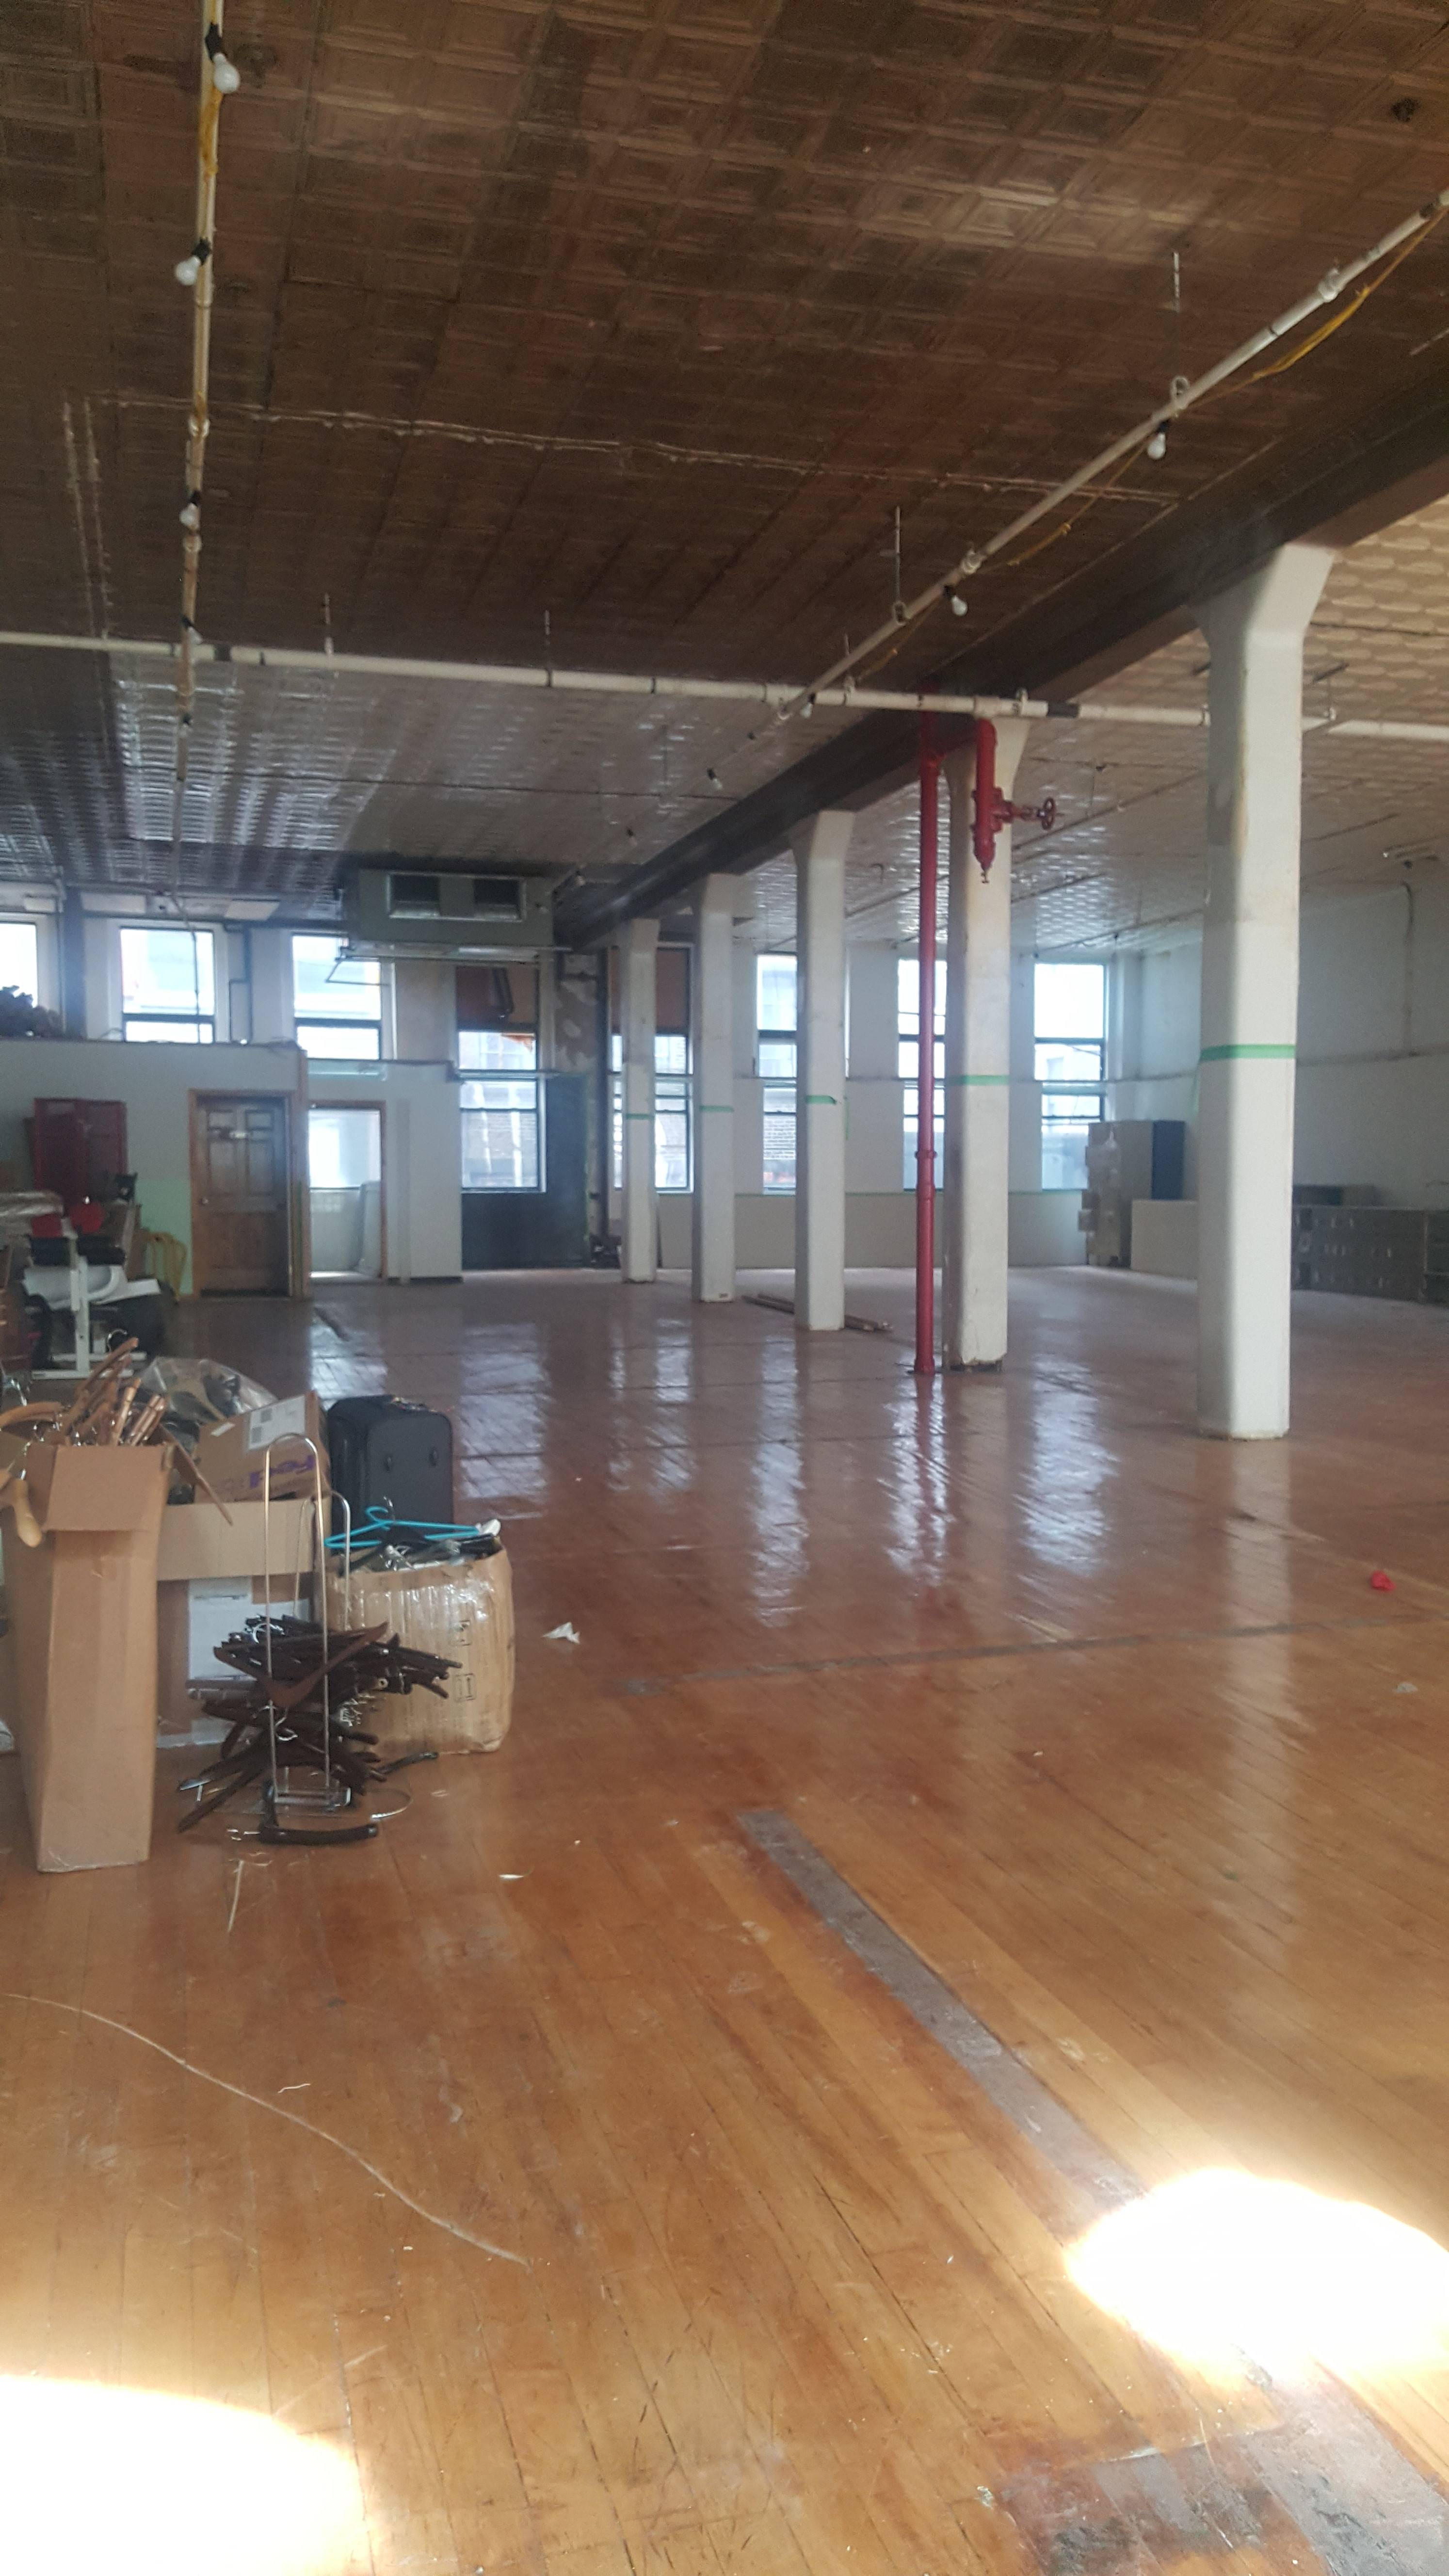 Gorgeous classic 5,000 Sq Ft Tribeca Open Loft Space for Commercial Use! Ideal for high end Showroom use & MORE!